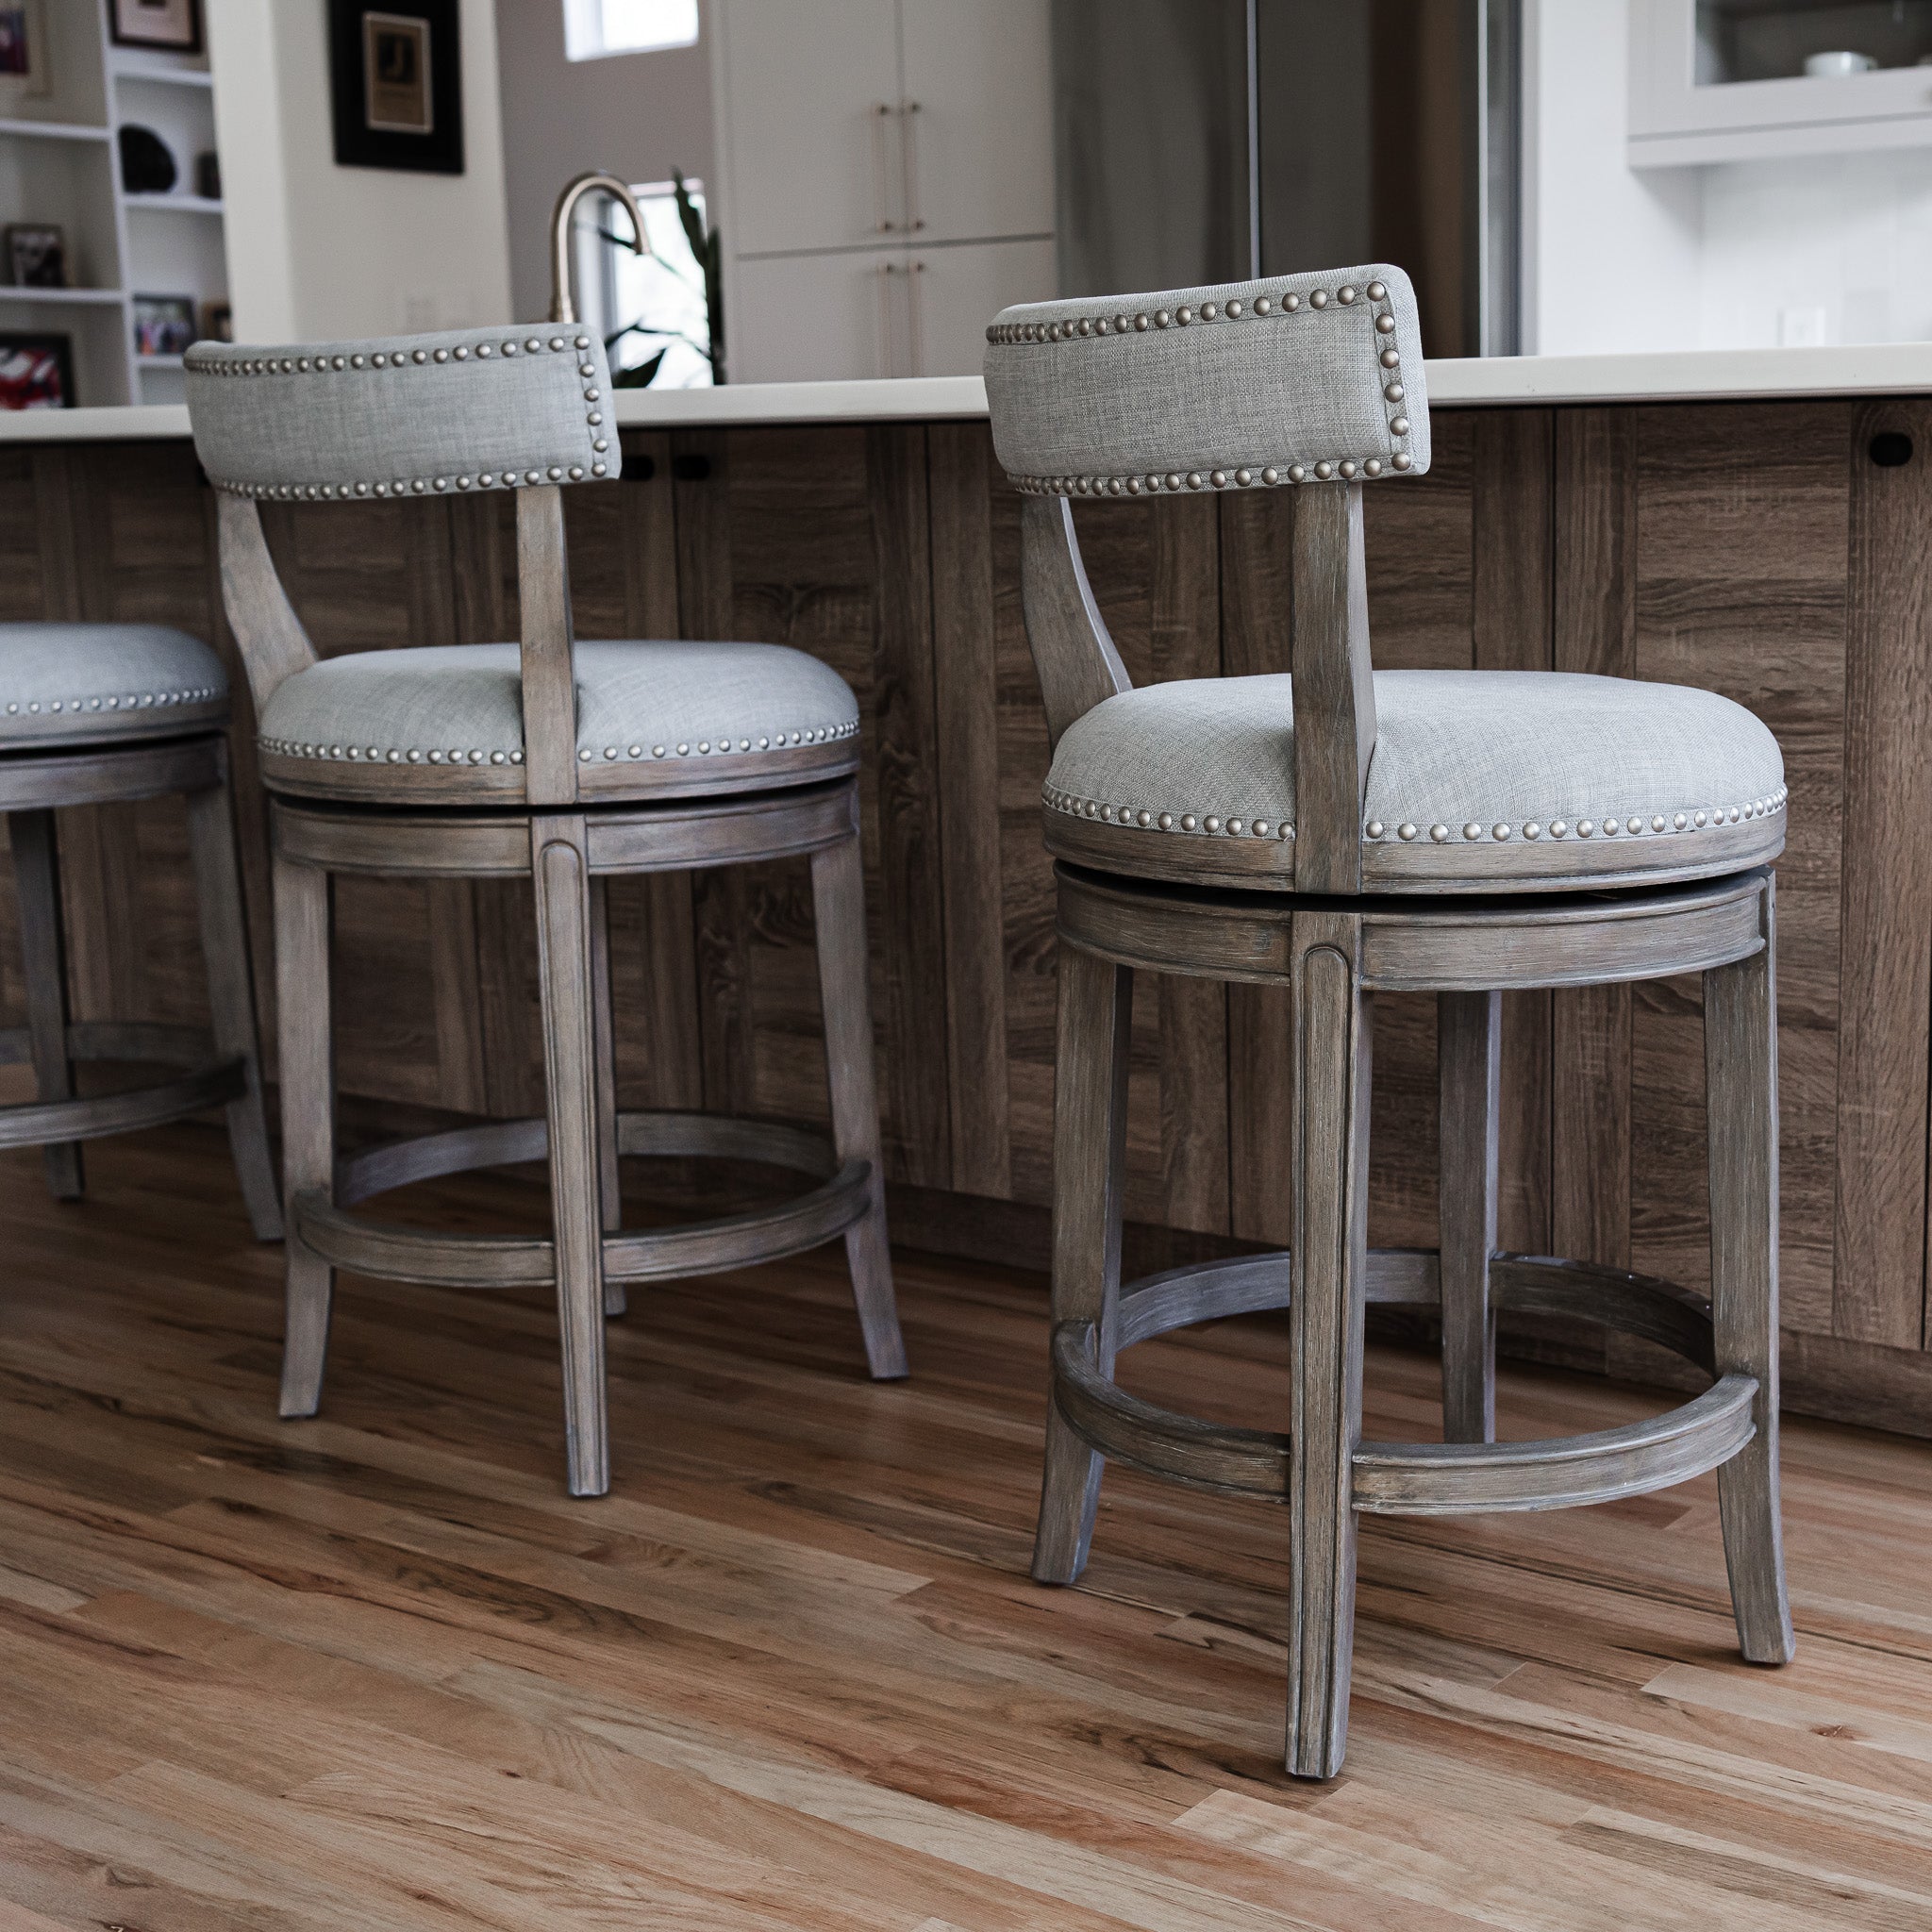 Alexander Bar Stool in Reclaimed Oak Finish with Ash Grey Fabric Upholstery in Stools by Maven Lane